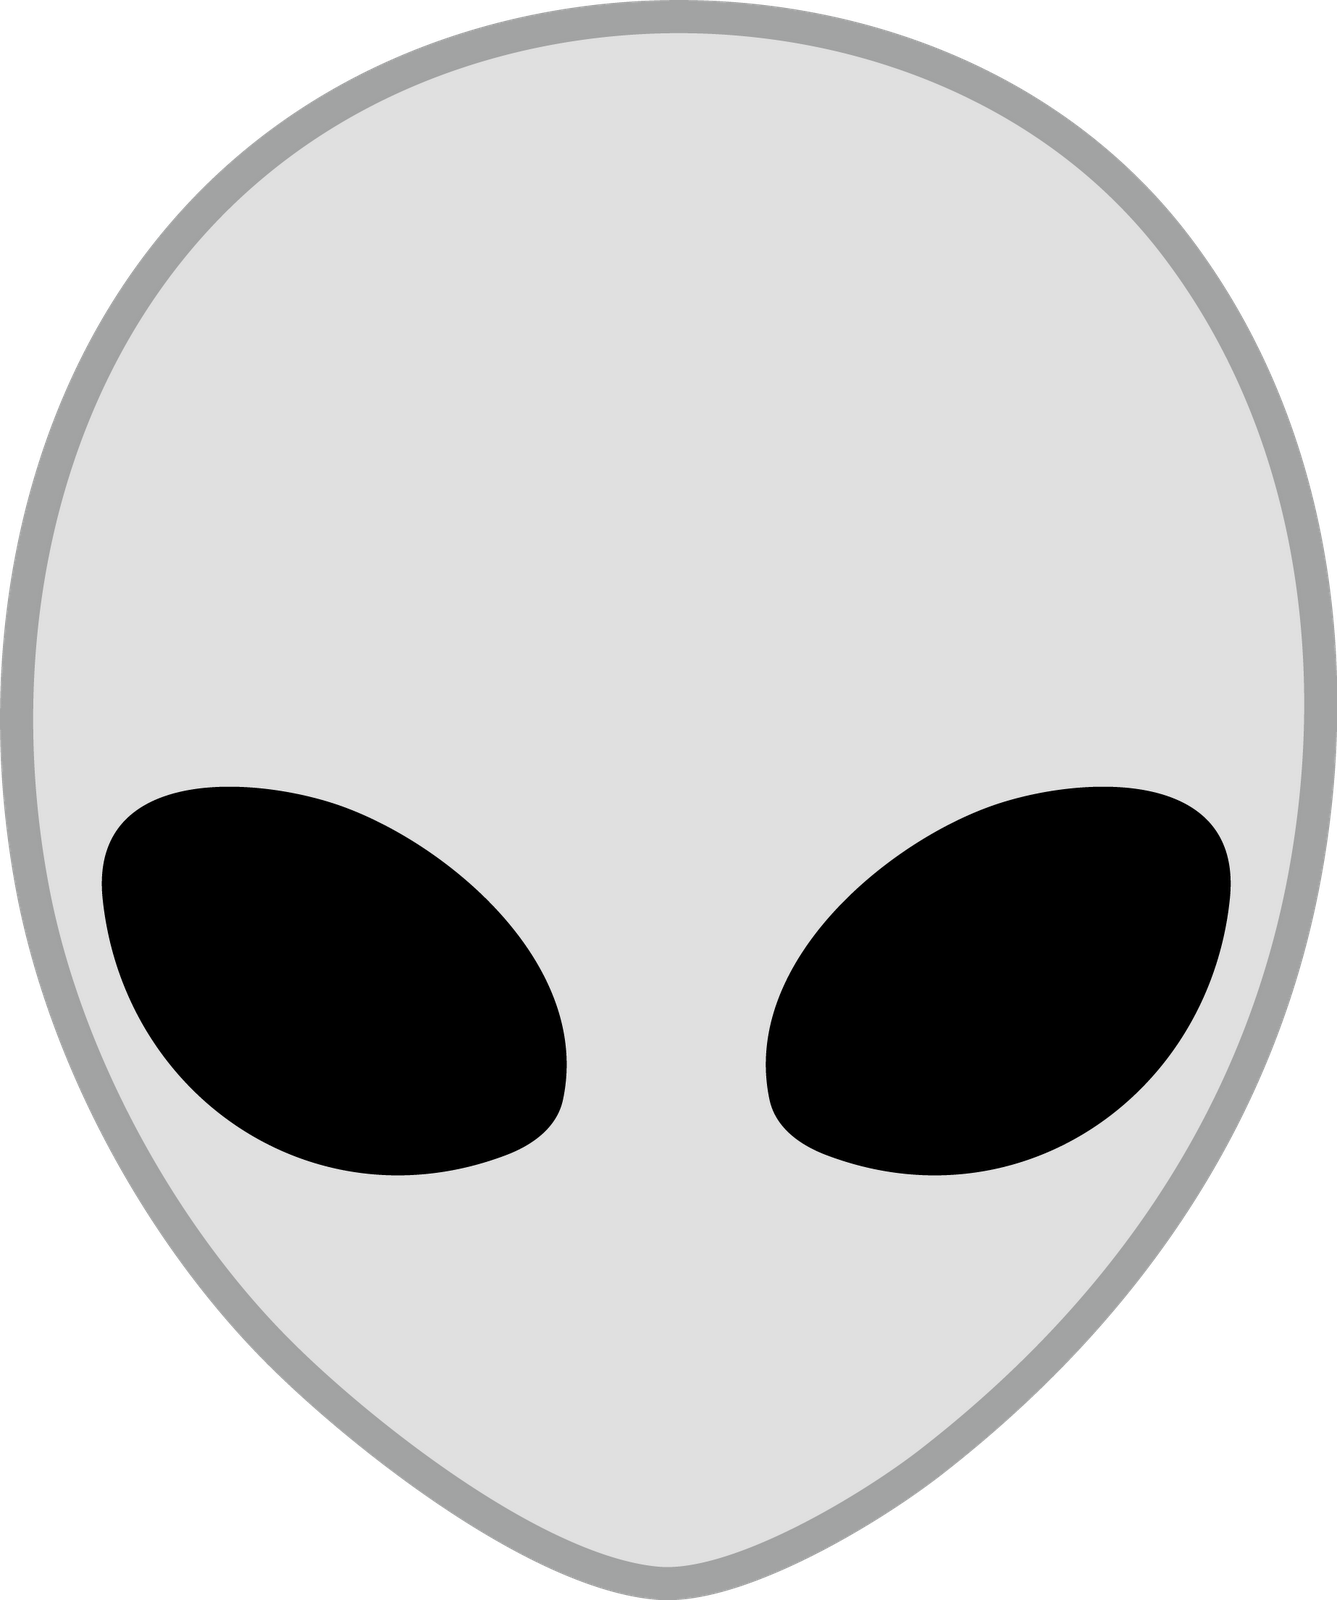 Rachel hydro character references. Ufo clipart simple cartoon